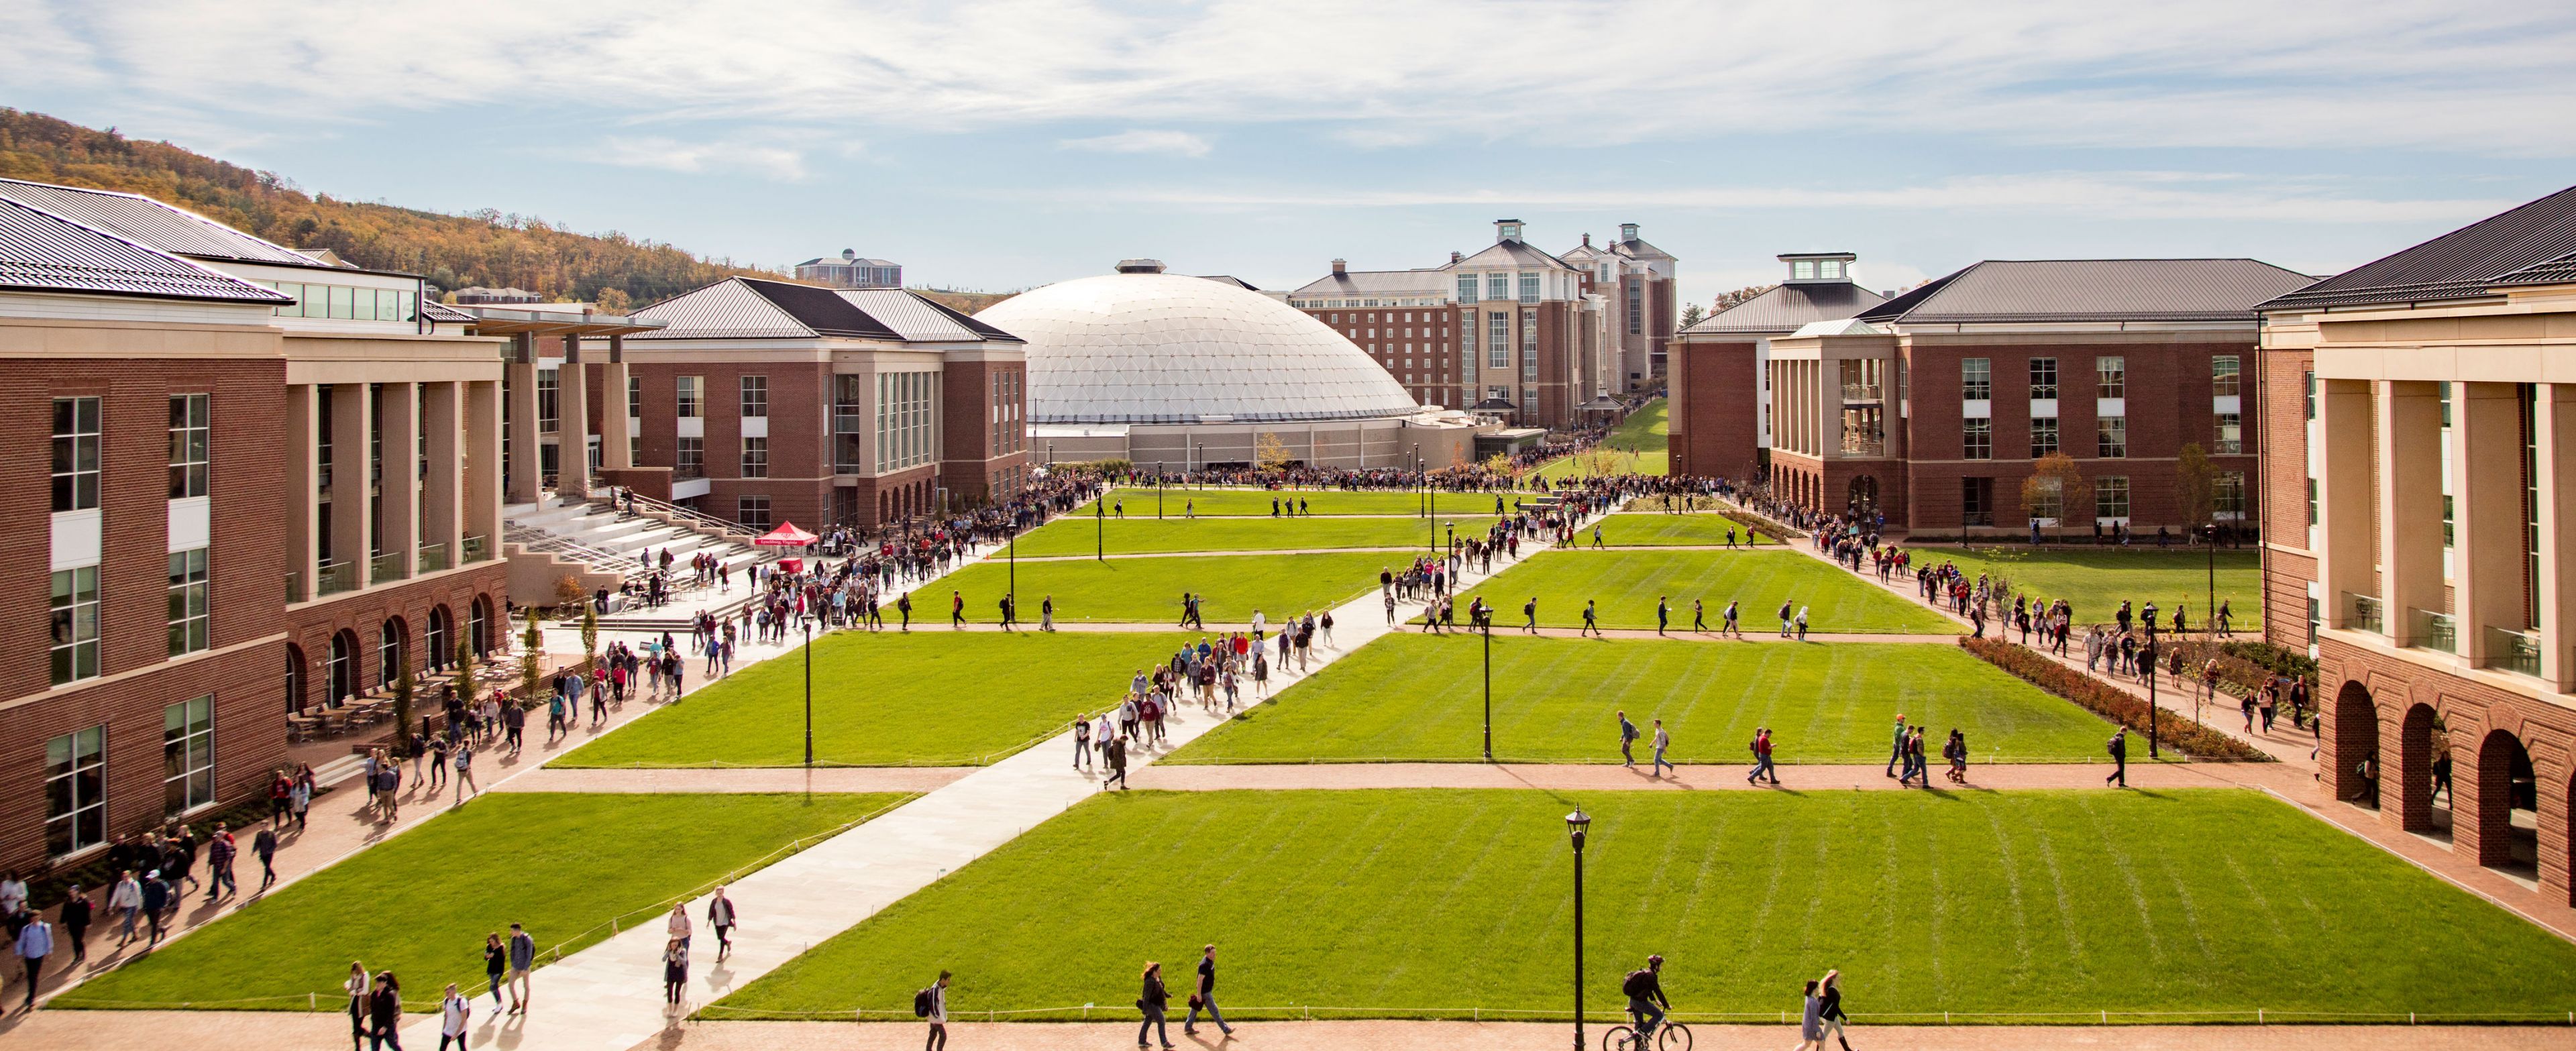 Liberty Ranked 1 Best Online College in America Liberty University